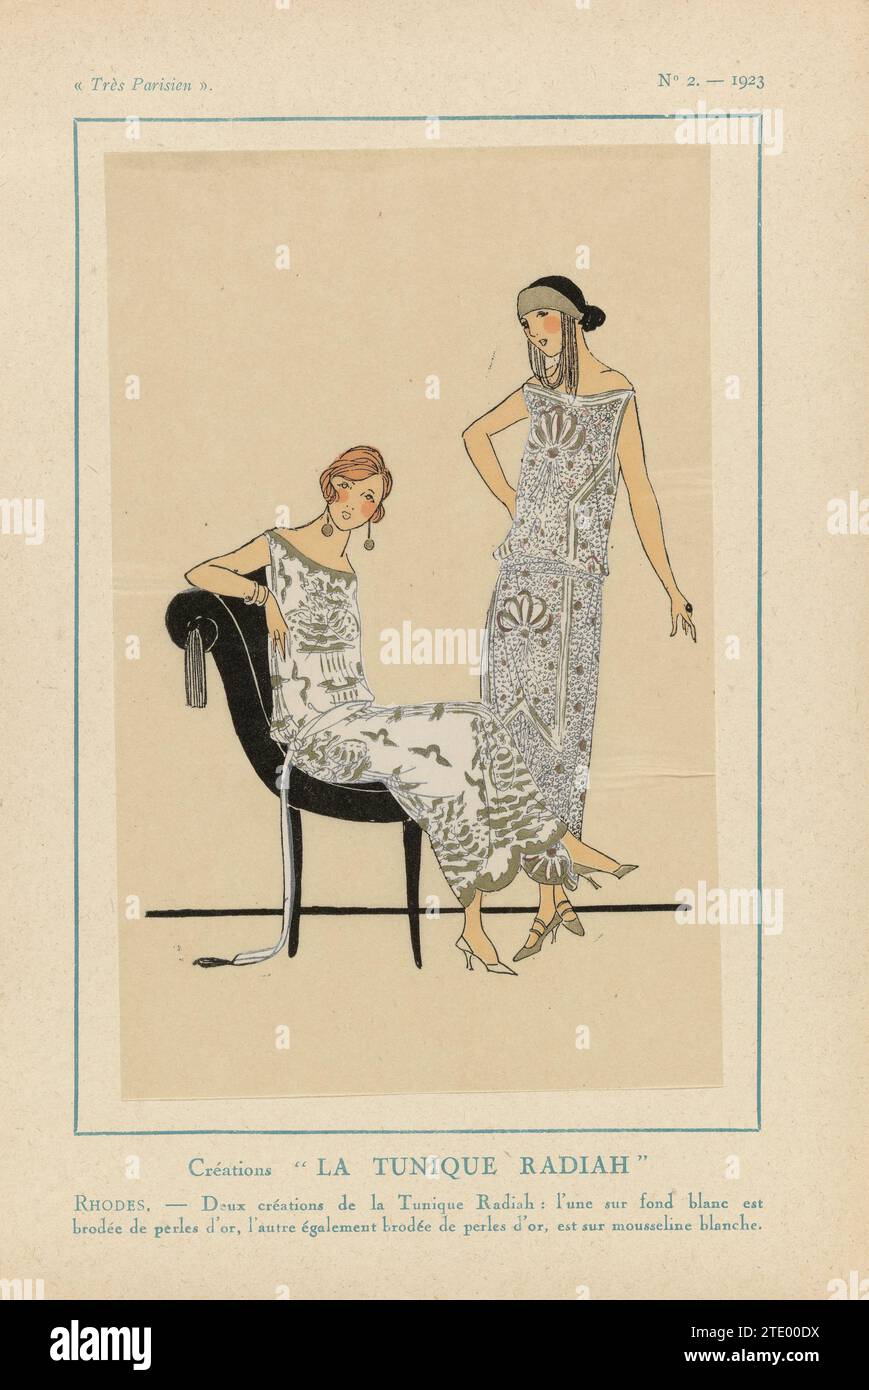 Very Parisian, 1923, No. 2: creations 'La Tunic Radiah' ..., 1923 Two designs by La Tunique Radiah: the one on a white surface and embroidered with gold beads, the other idem embroidered with gold beads on a white muslin. Accessories: headband, earrings, pumps and/or shoes with straps. Print from the fashion magazine Très Parisien (1920-1936). Paris paper letterpress printing Two designs by La Tunique Radiah: the one on a white surface and embroidered with gold beads, the other idem embroidered with gold beads on a white muslin. Accessories: headband, earrings, pumps and/or shoes with straps. Stock Photo